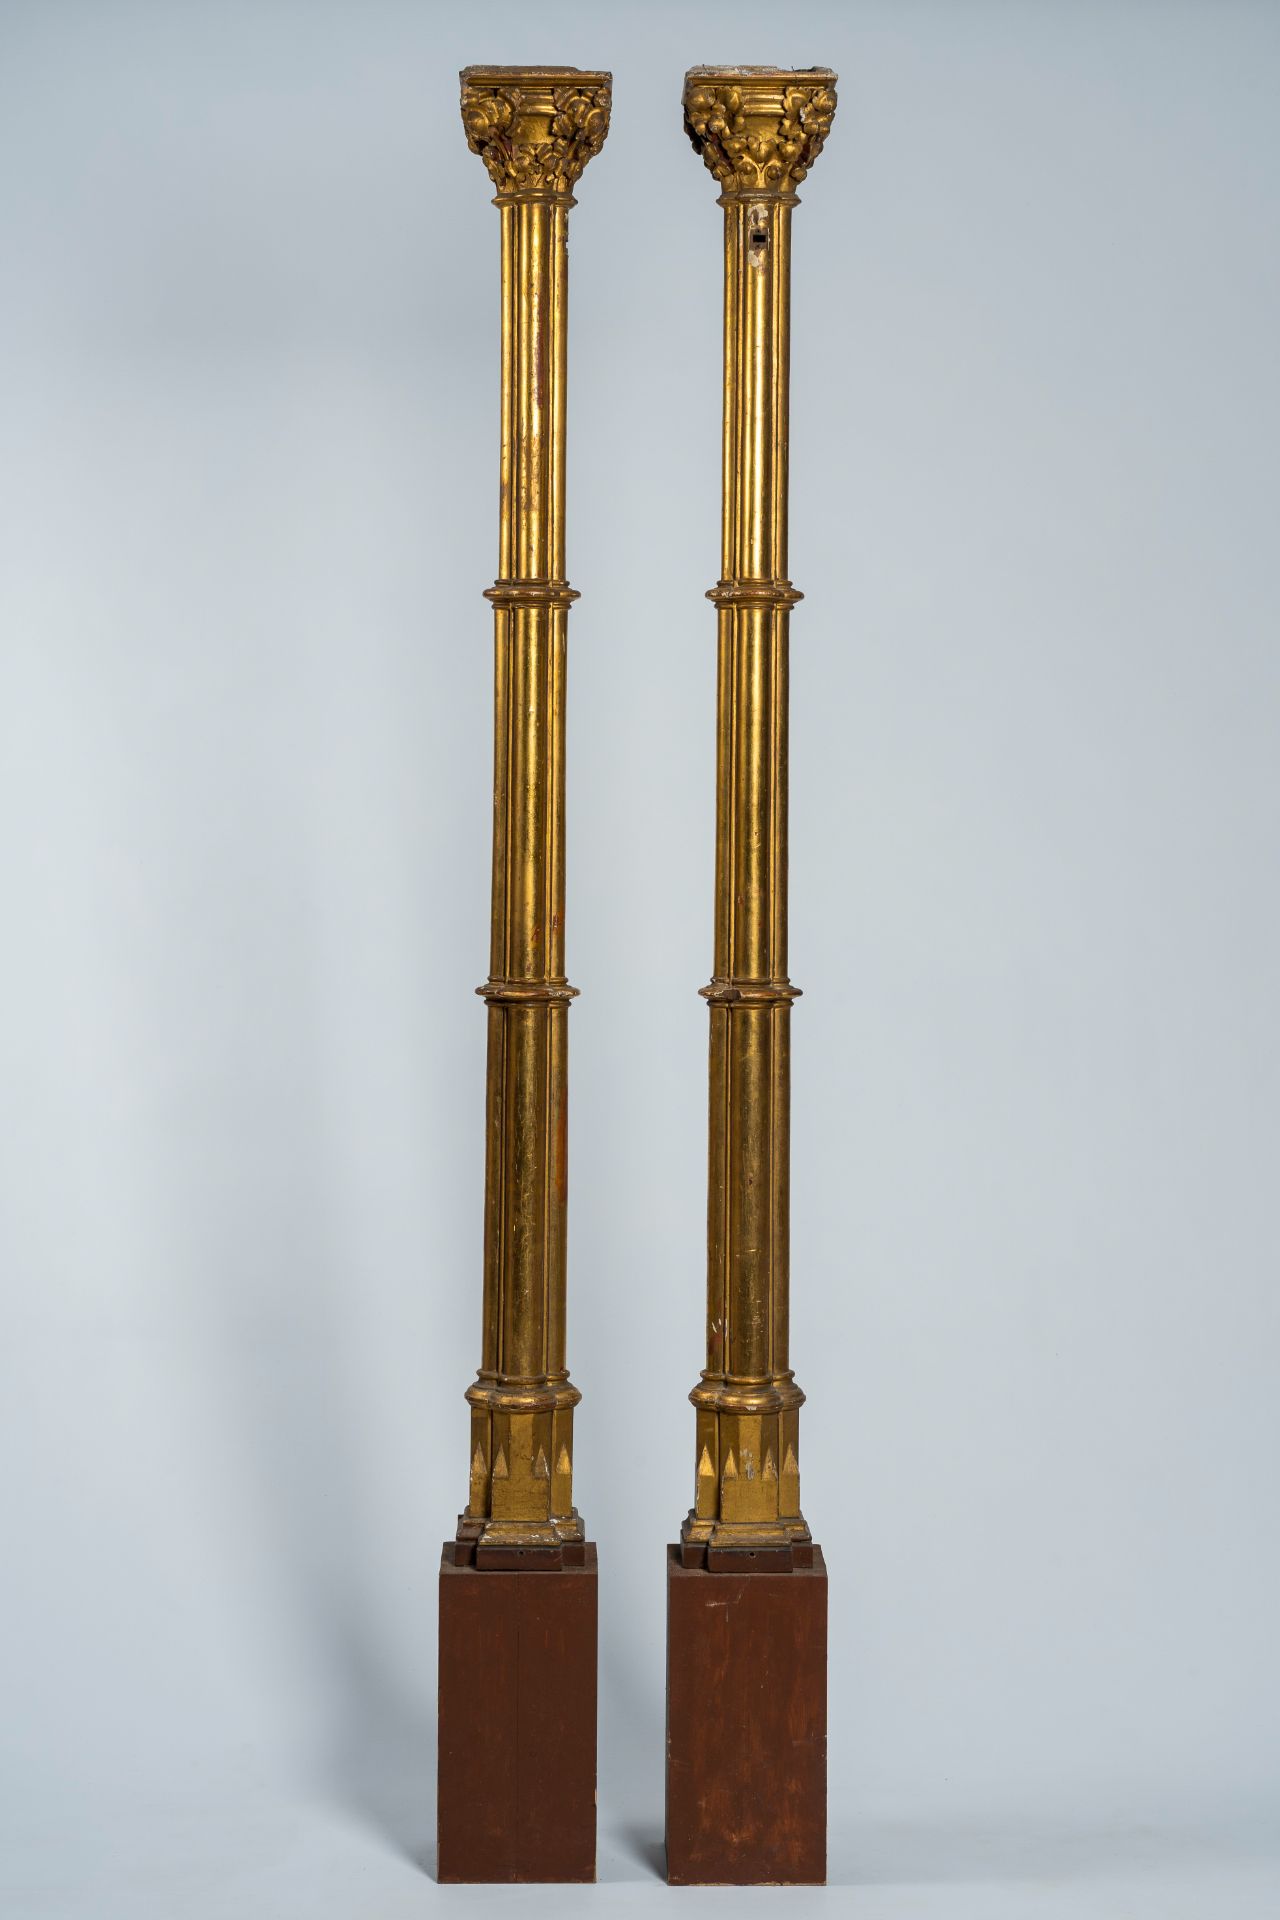 A pair of large Gothic revival gilt wood pillars, 19th C. - Image 4 of 8